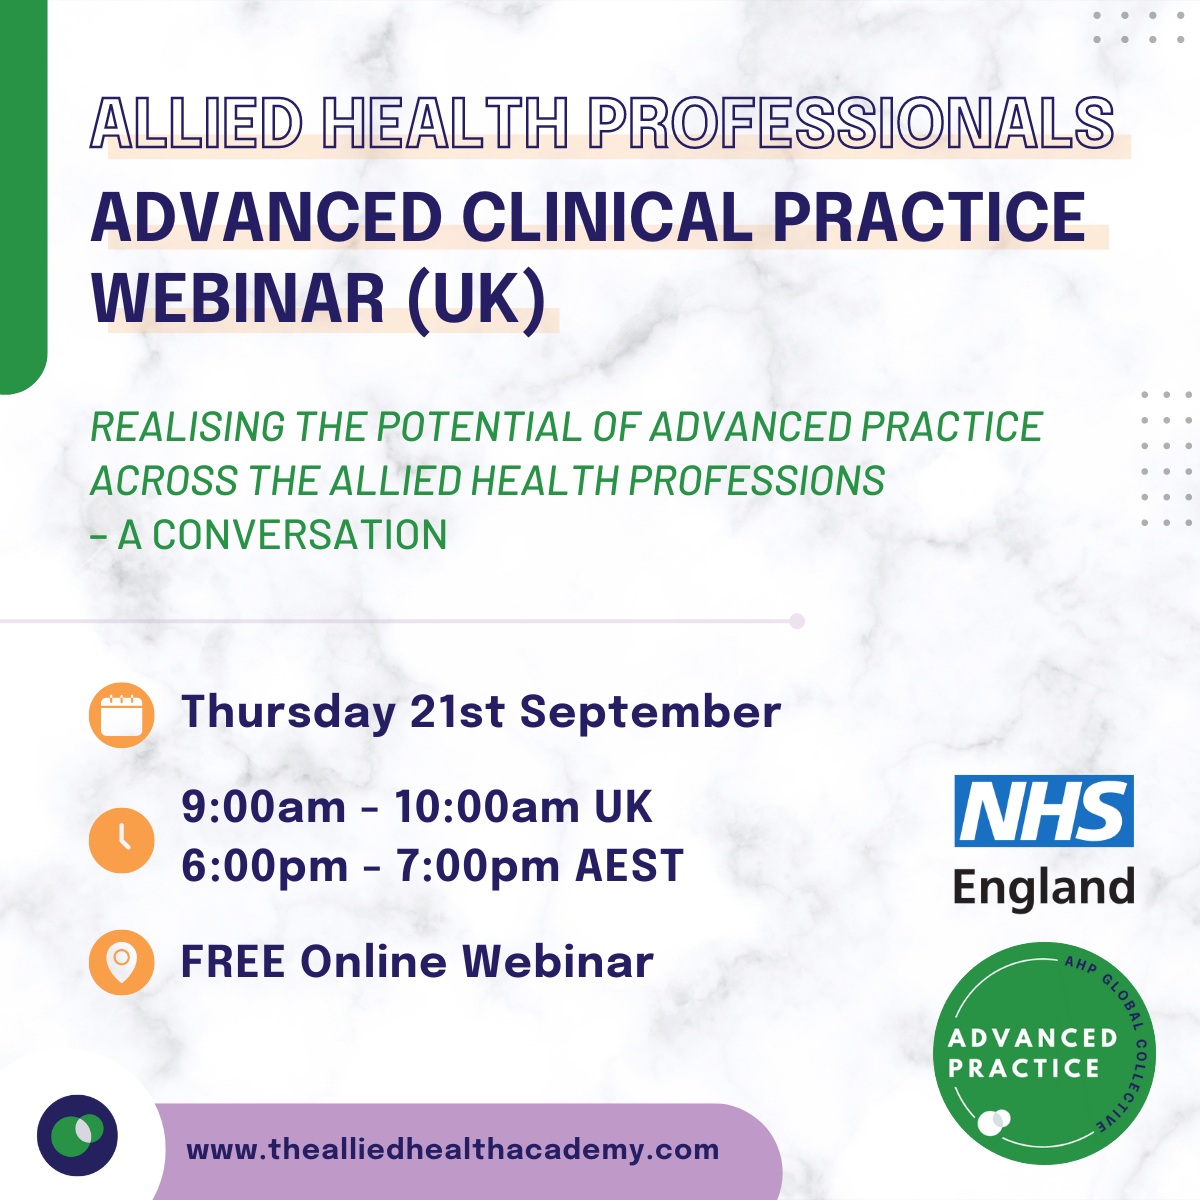 AHP Advanced Practice Collective Webinar - Advanced Clinical Practice (UK)